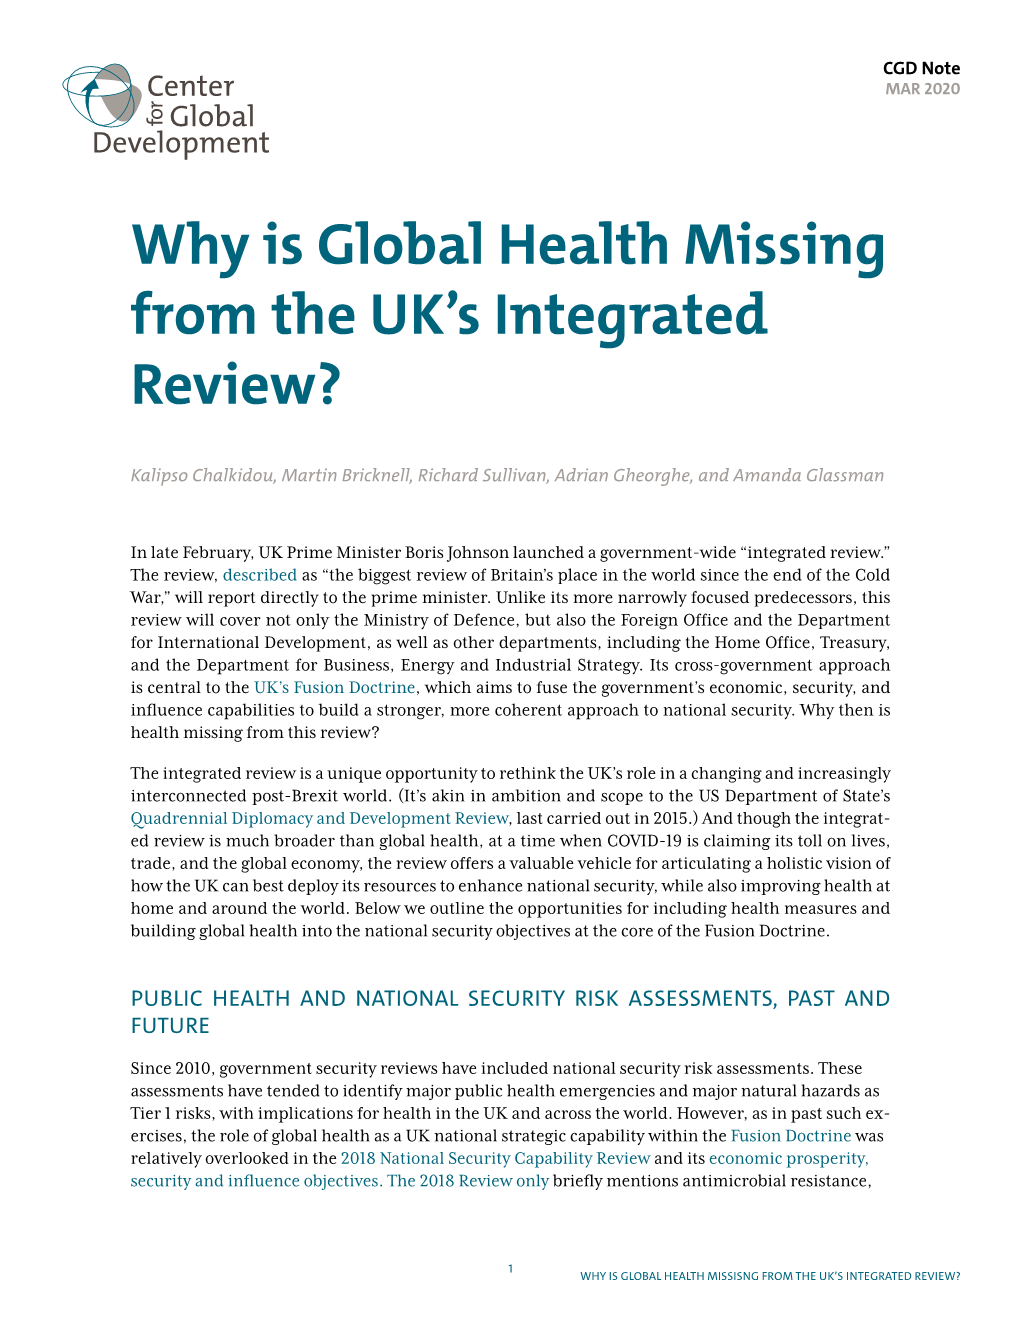 Why Is Global Health Missing from the UK's Integrated Review?